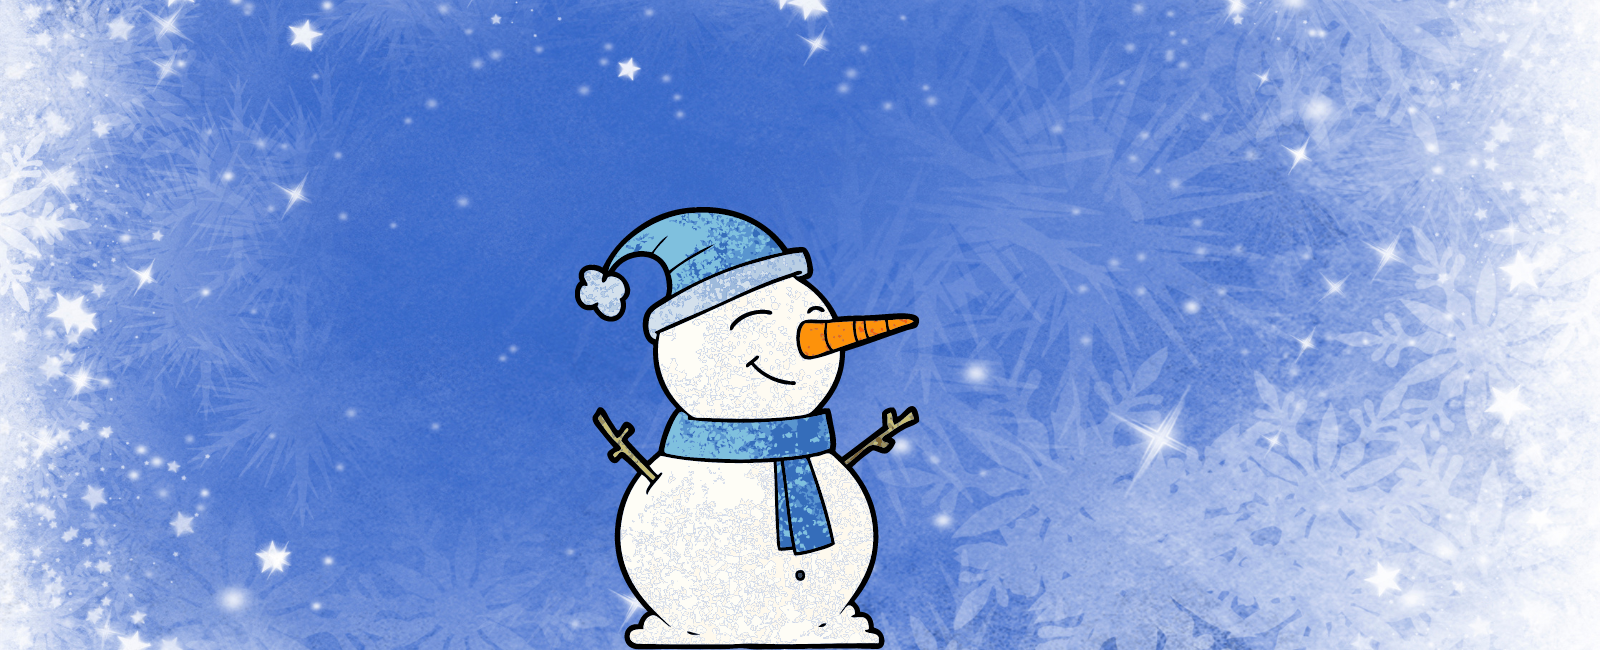 Light blue background with snowflakes. Happy snowman with blue hat and carrot nose in the middle of the image.